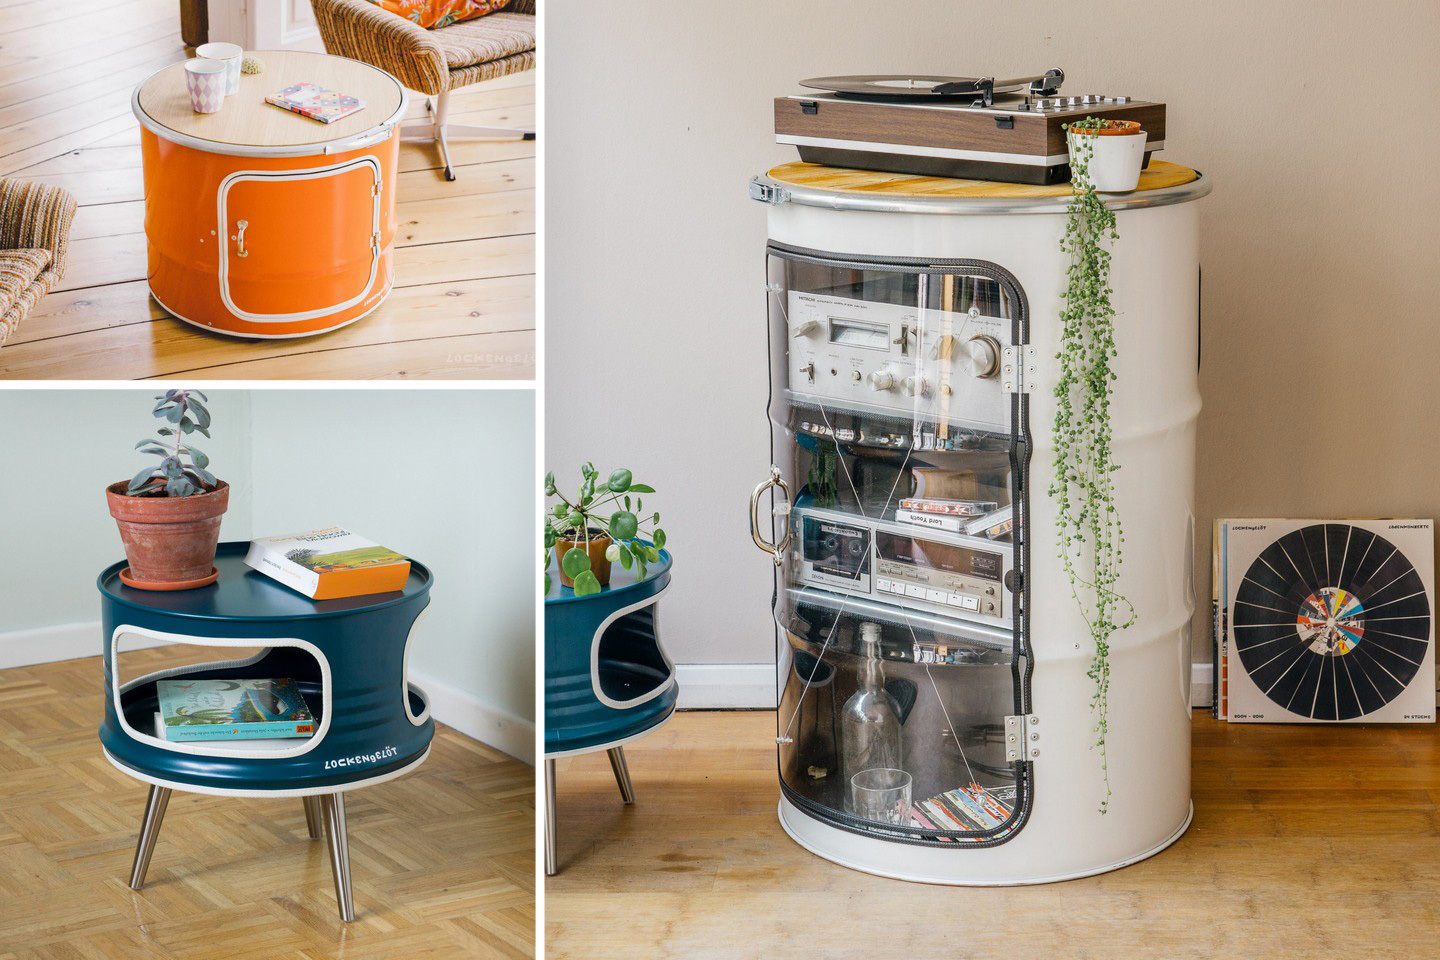 These discarded oil barrels are getting a new lease of life by being upcycled into furniture